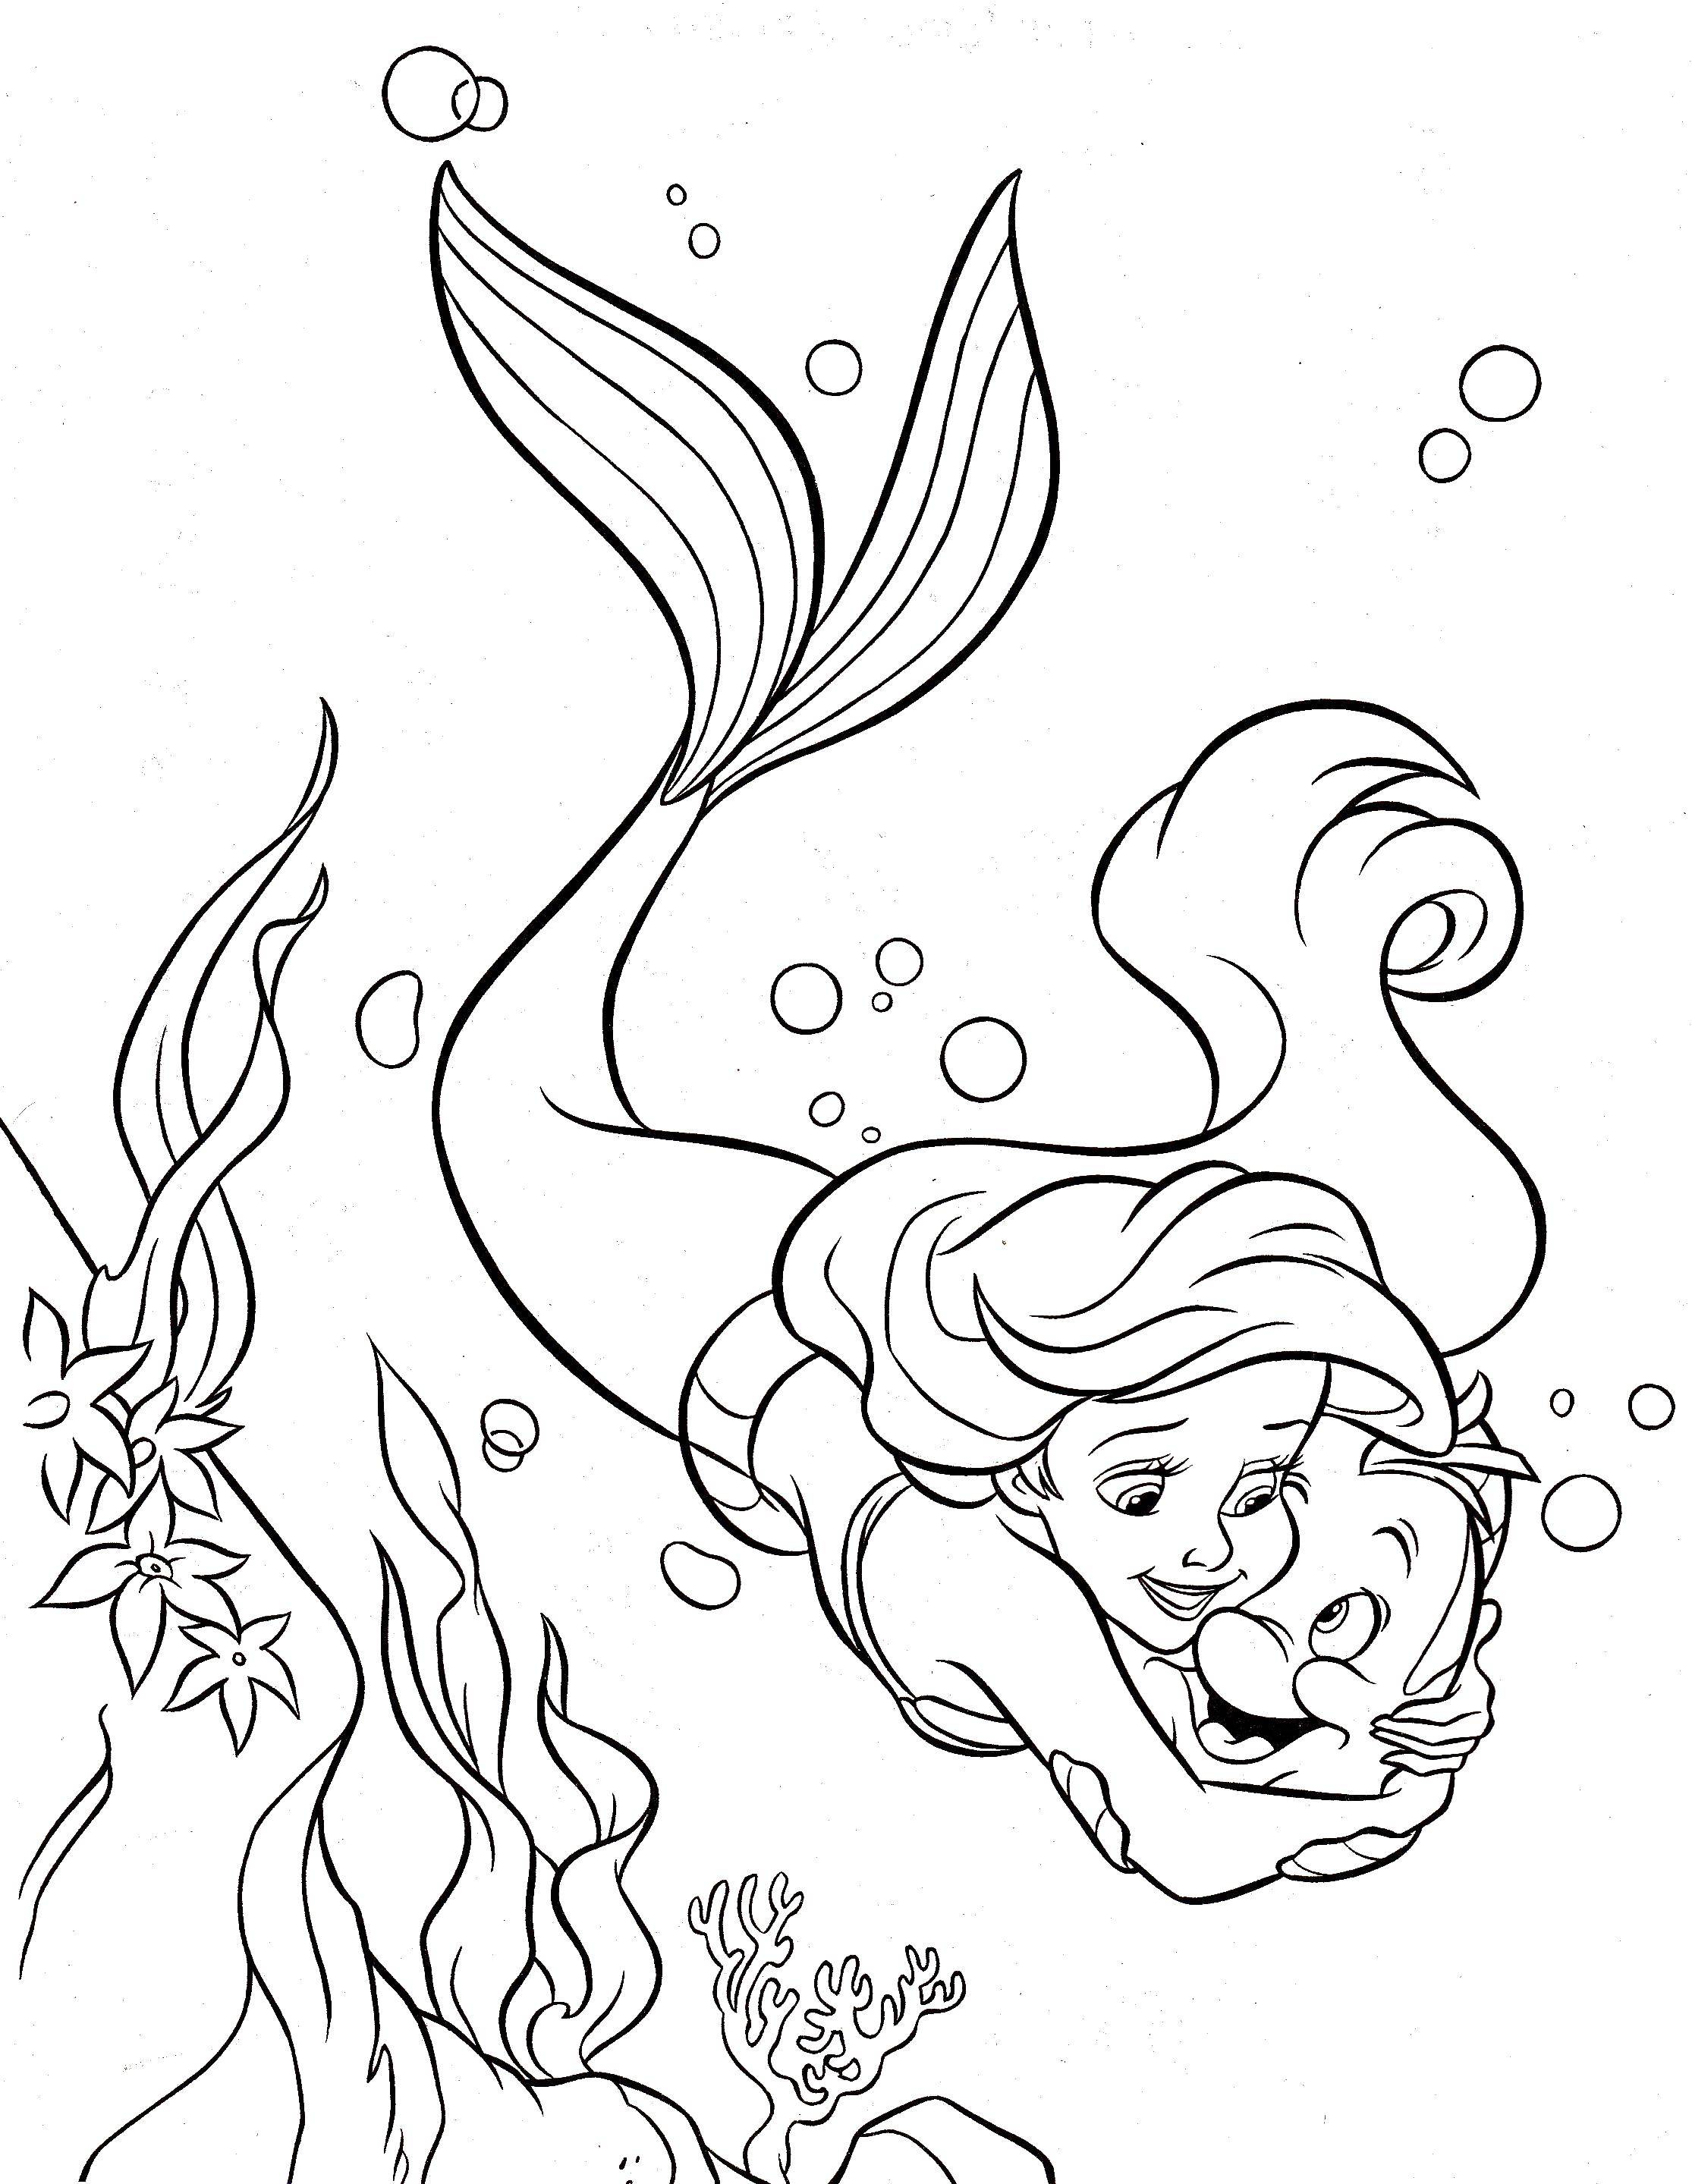 Coloring Best underwater friends. Category Disney coloring pages. Tags:  Disney, the little mermaid, Ariel.